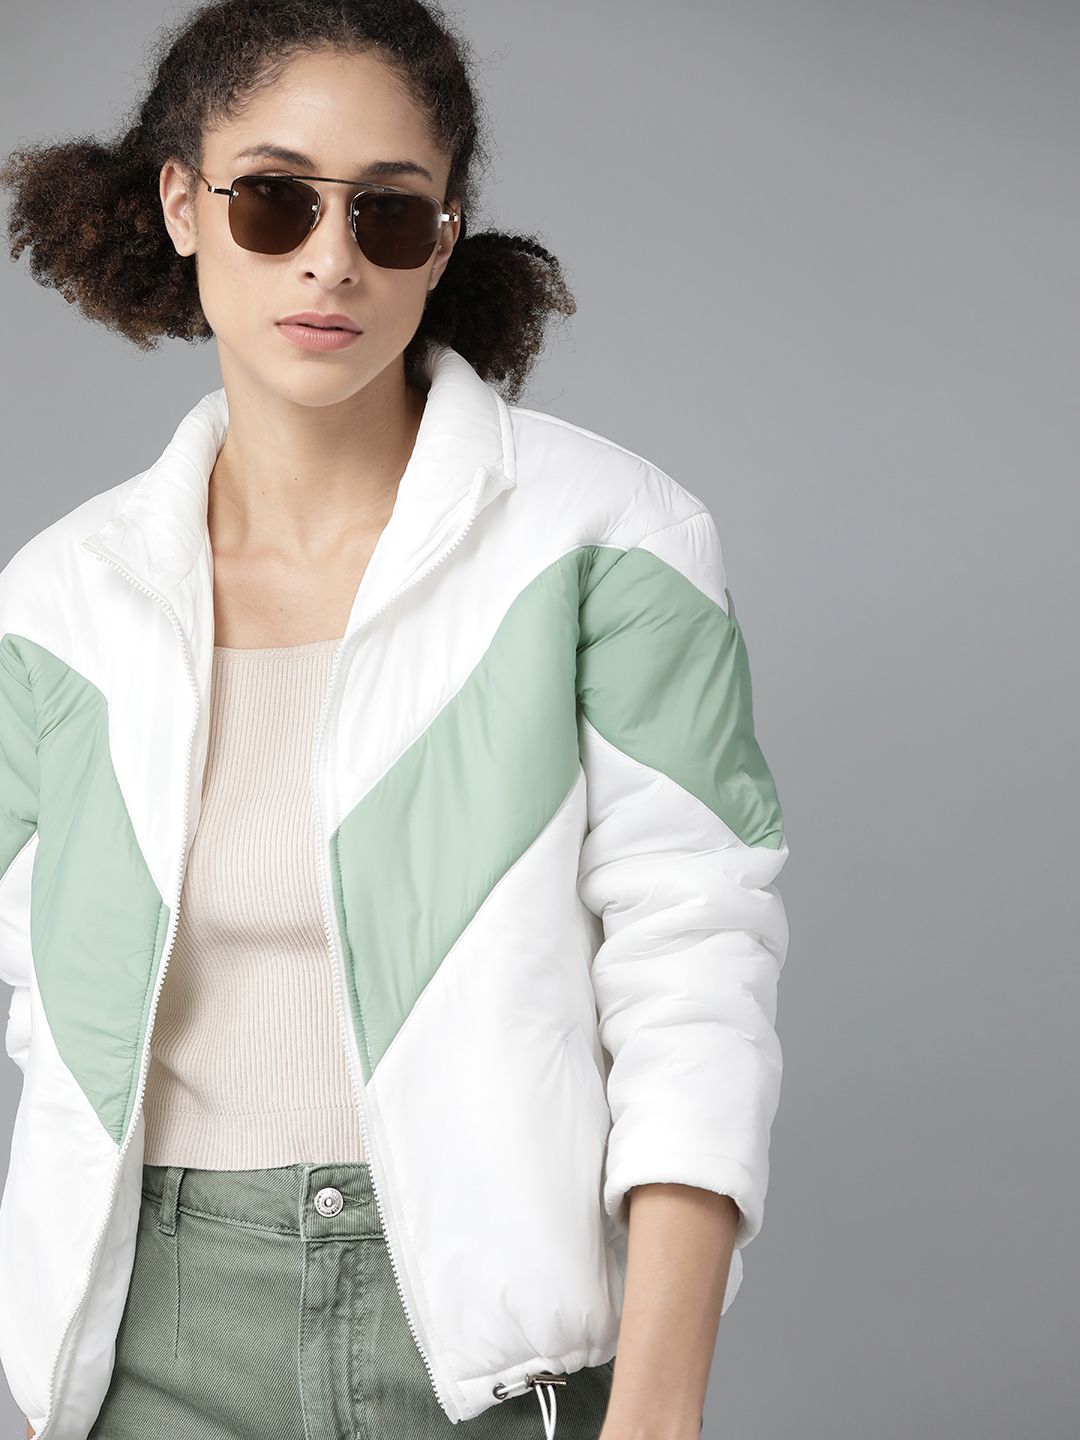 Roadster Women White & Green Colourblocked Padded Jacket Price in India